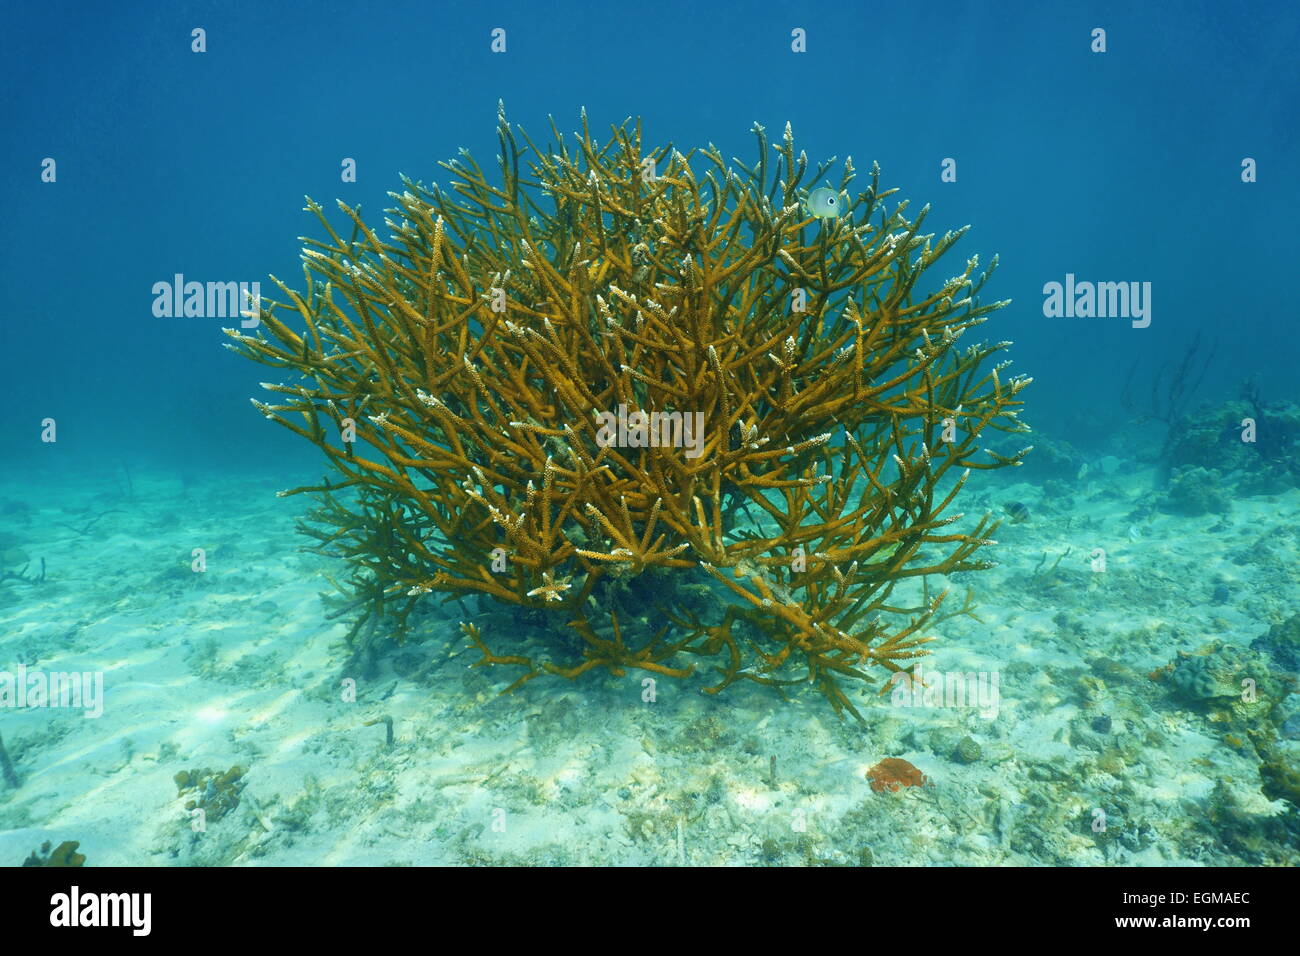 Colony of Staghorn coral, Acropora cervicornis, underwater in the Caribbean sea Stock Photo